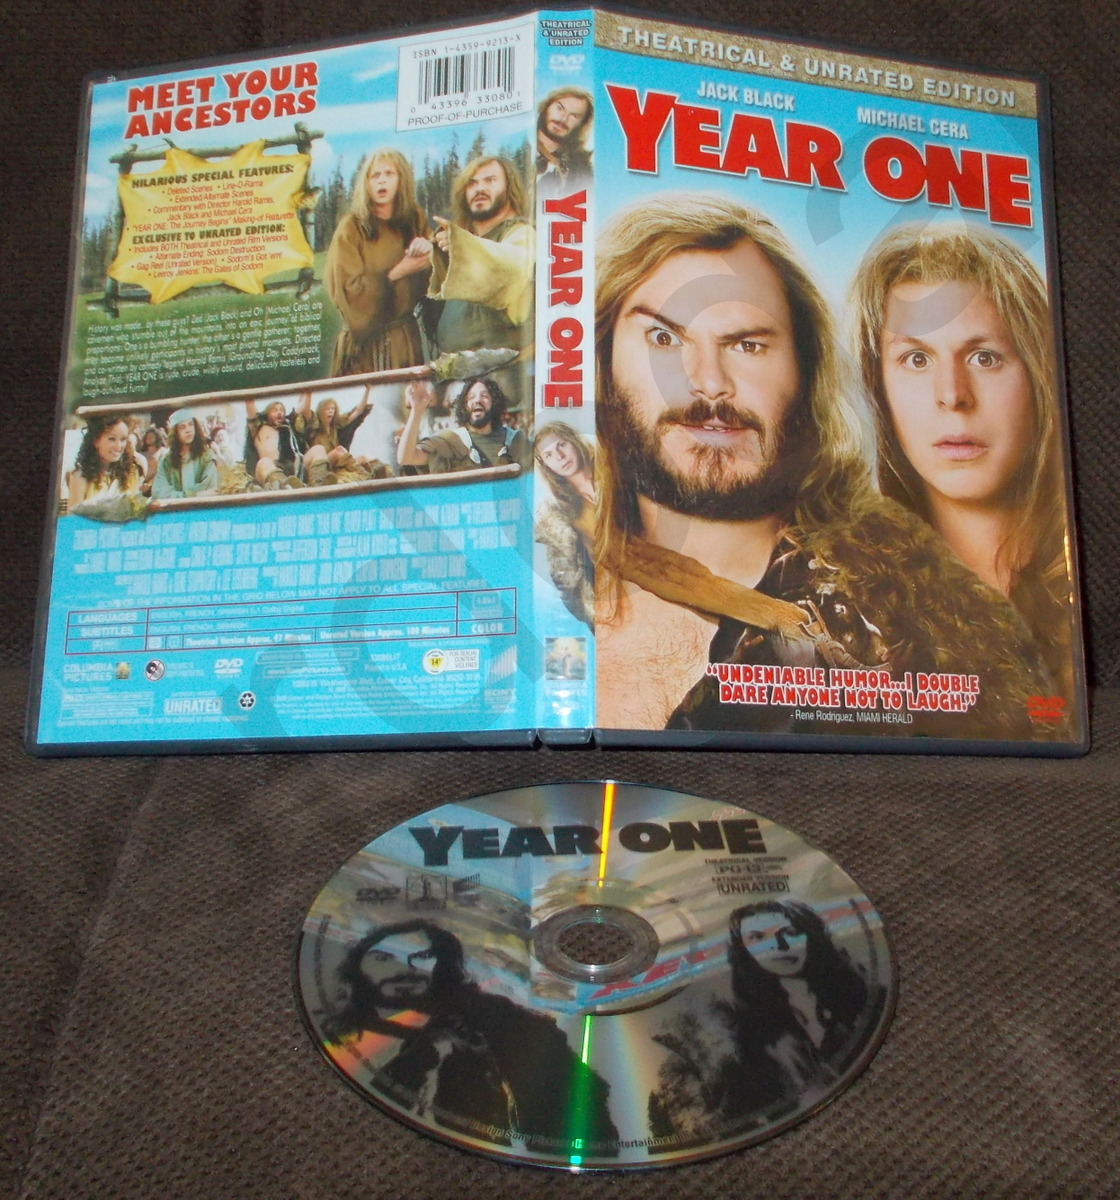 Year One (DVD, 2009, Unrated) Jack Black, Michael Cera